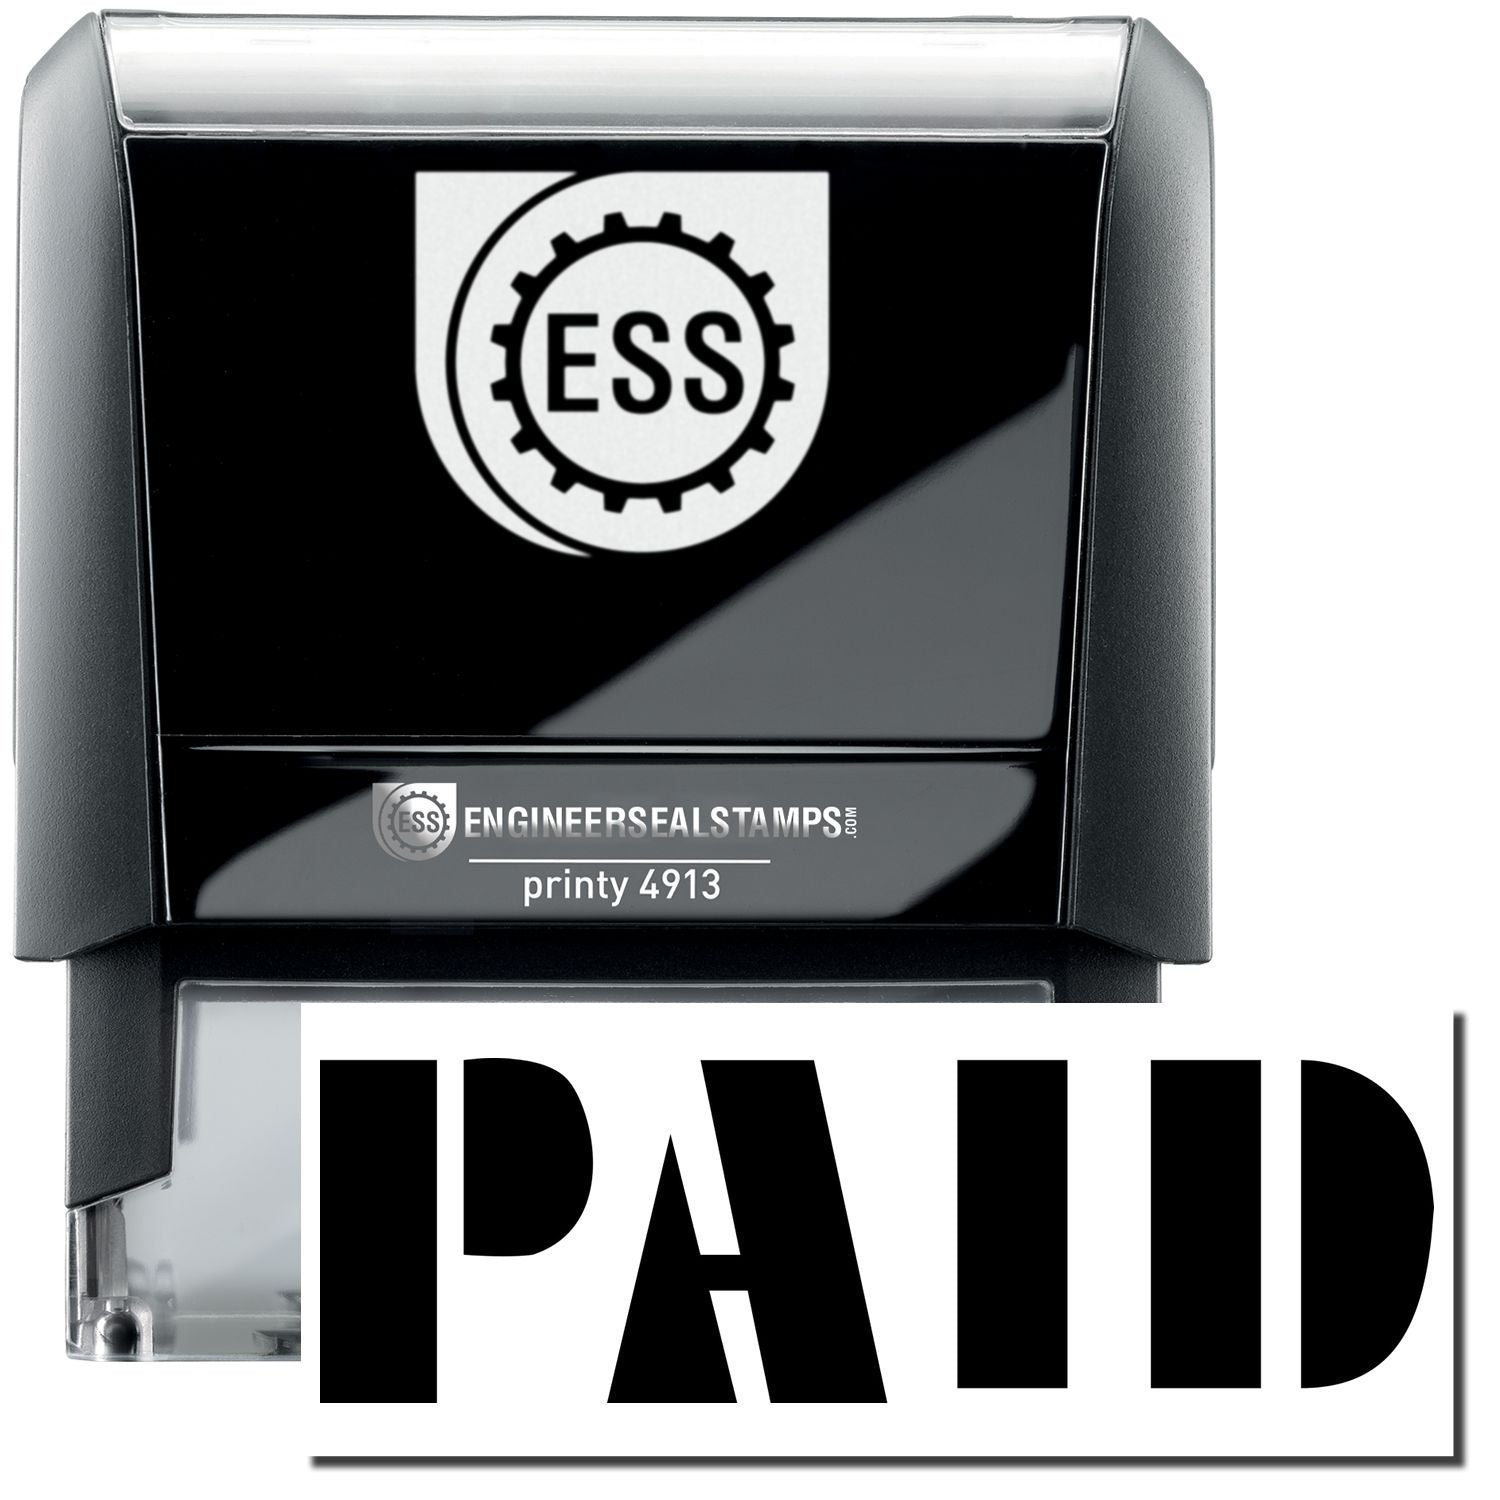 A self-inking stamp with a stamped image showing how the text "PAID" in a unique large bold font is displayed by it after stamping.